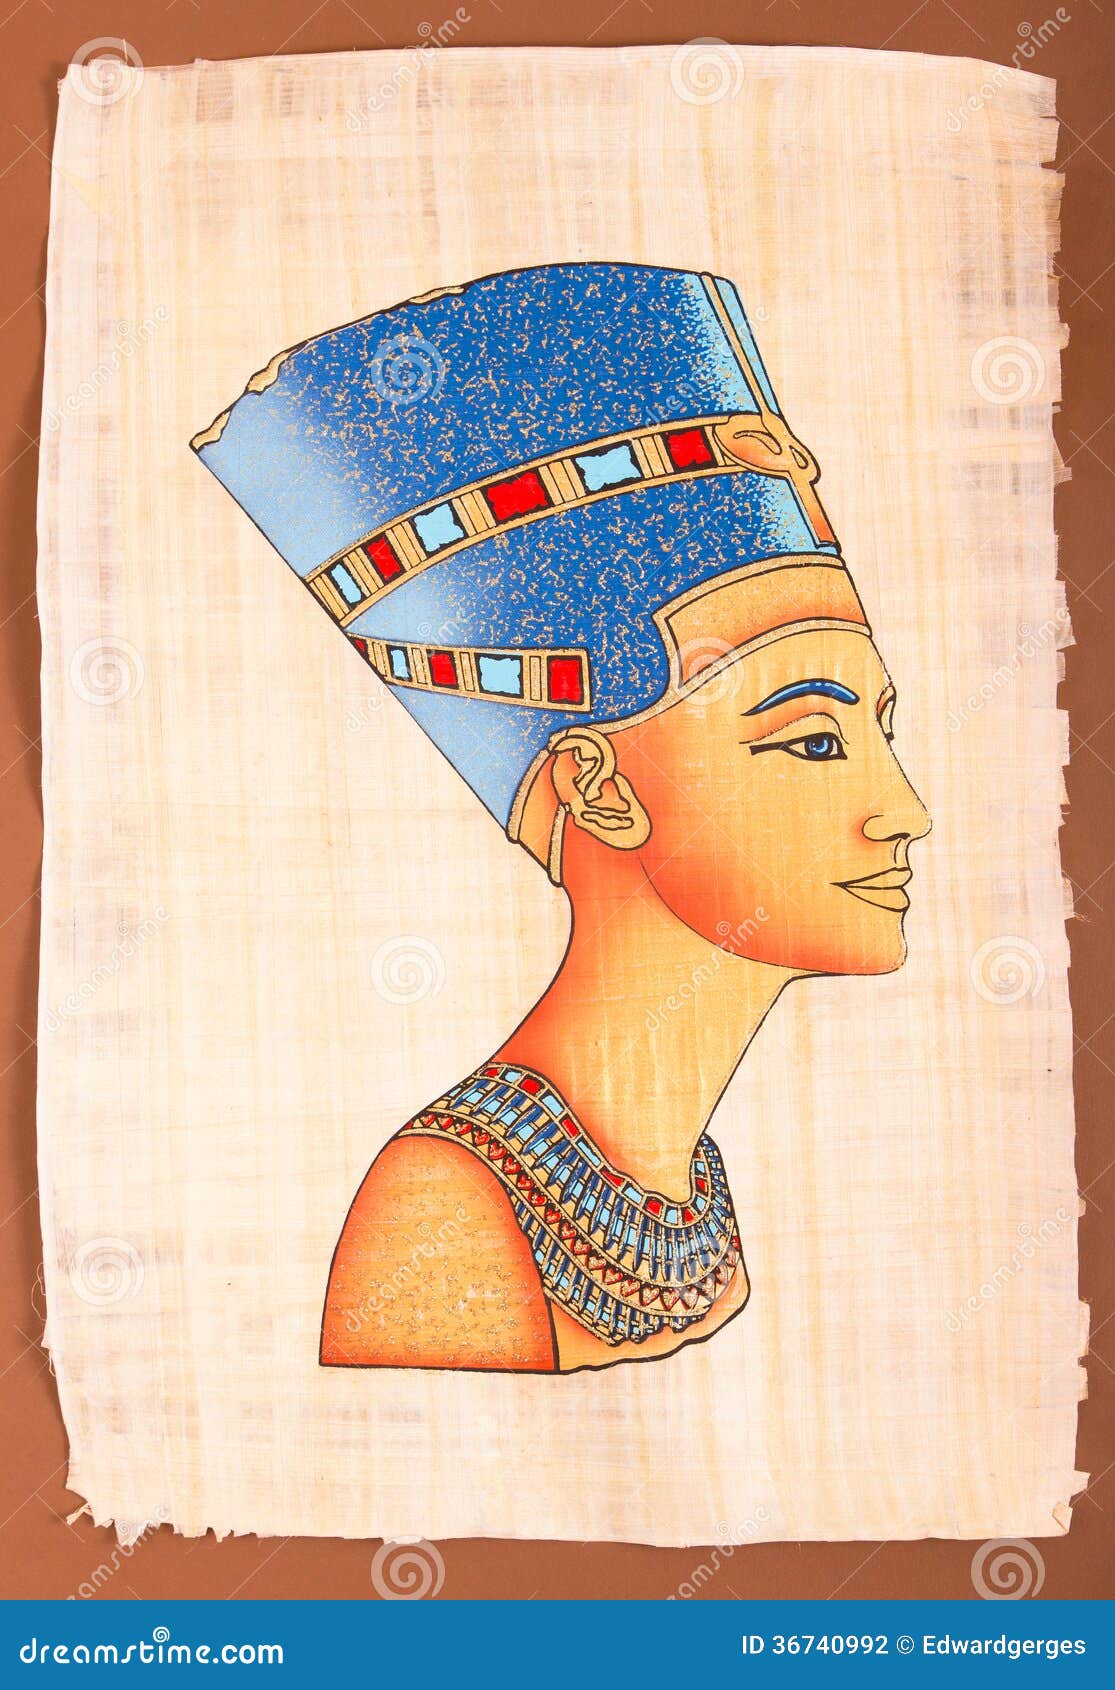 Details about   Egyptian Papyrus 20x15 Cm Hand Painted Queen Nefertiti 